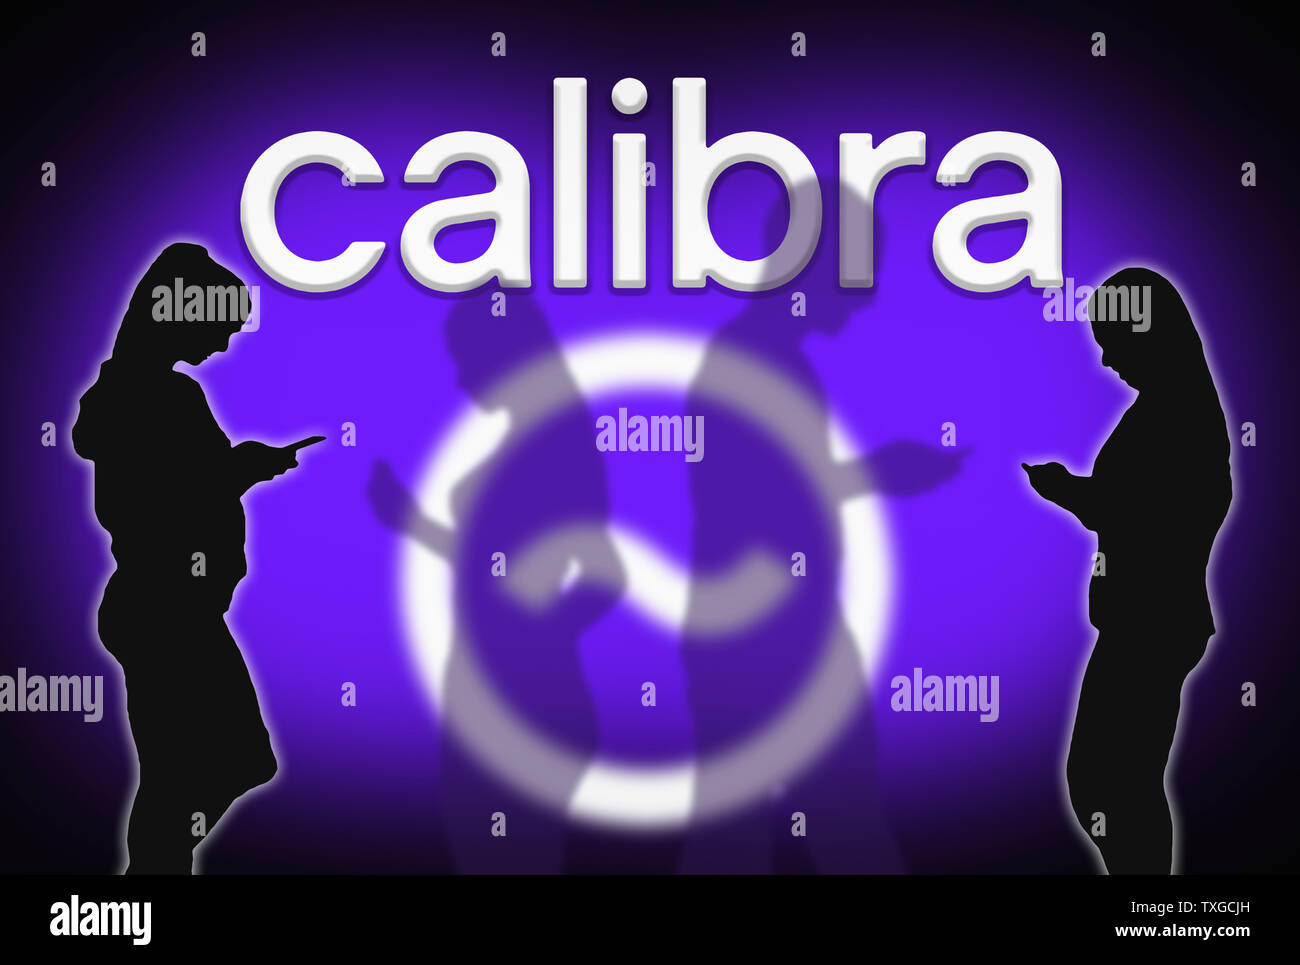 Silhouettes of people using Facebook's Calibra Digital Wallet app on mobile devices, sending & receiving money using Libra blockchain cryptocurrency. Stock Photo